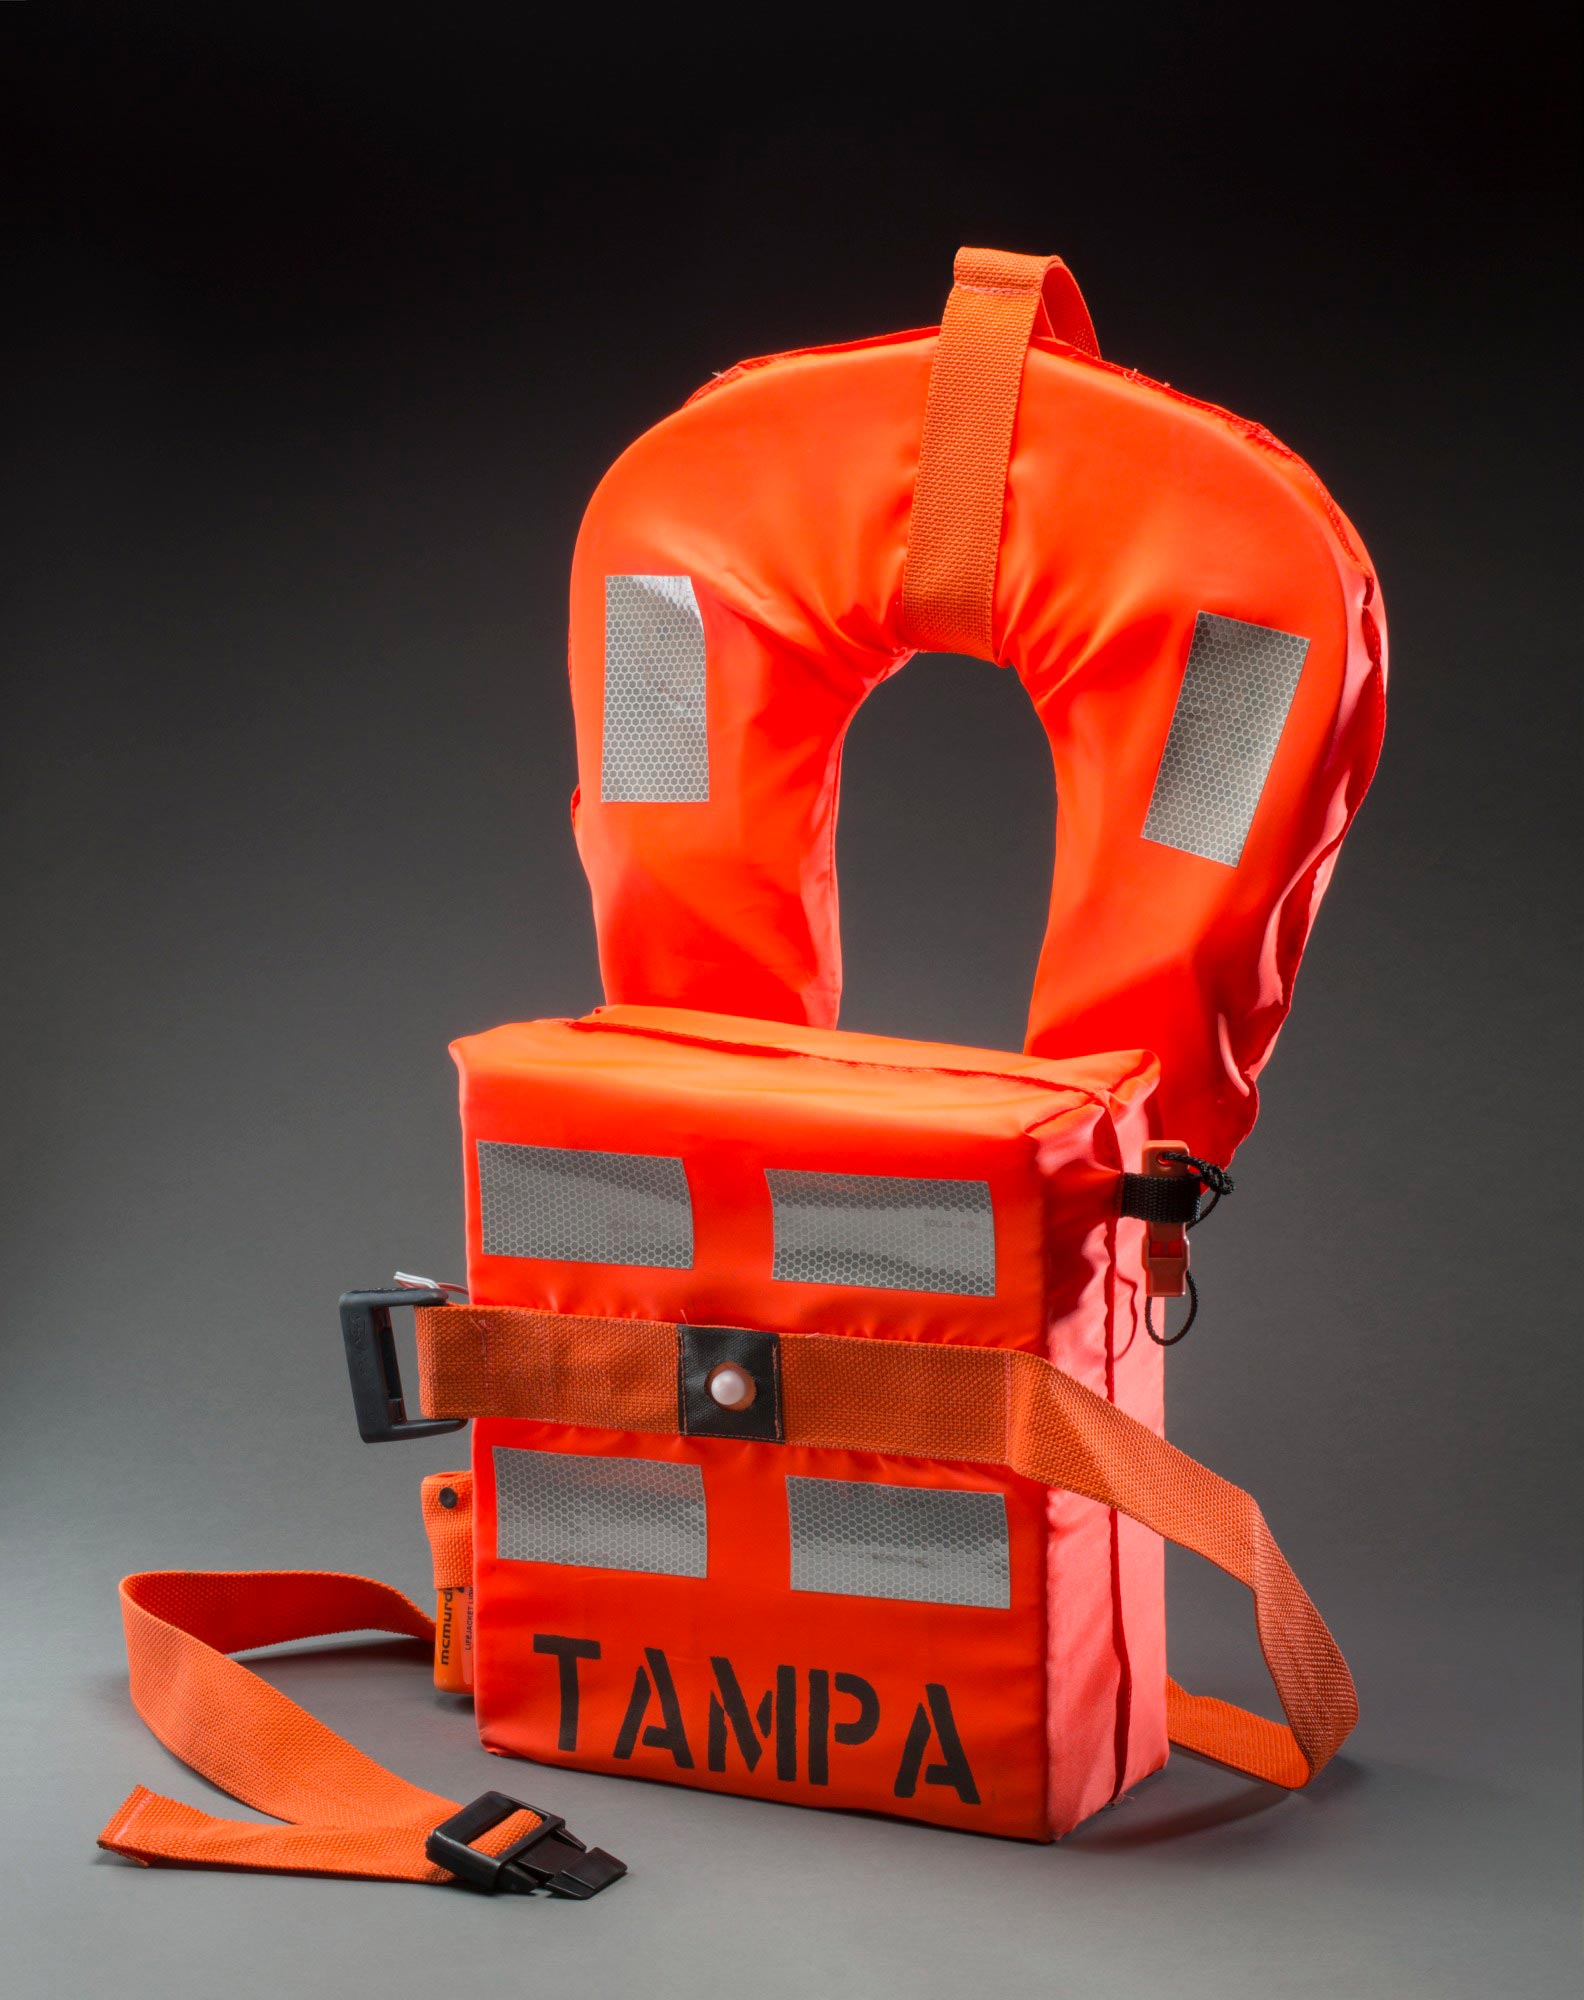 Life jacket from the MV Tampa.